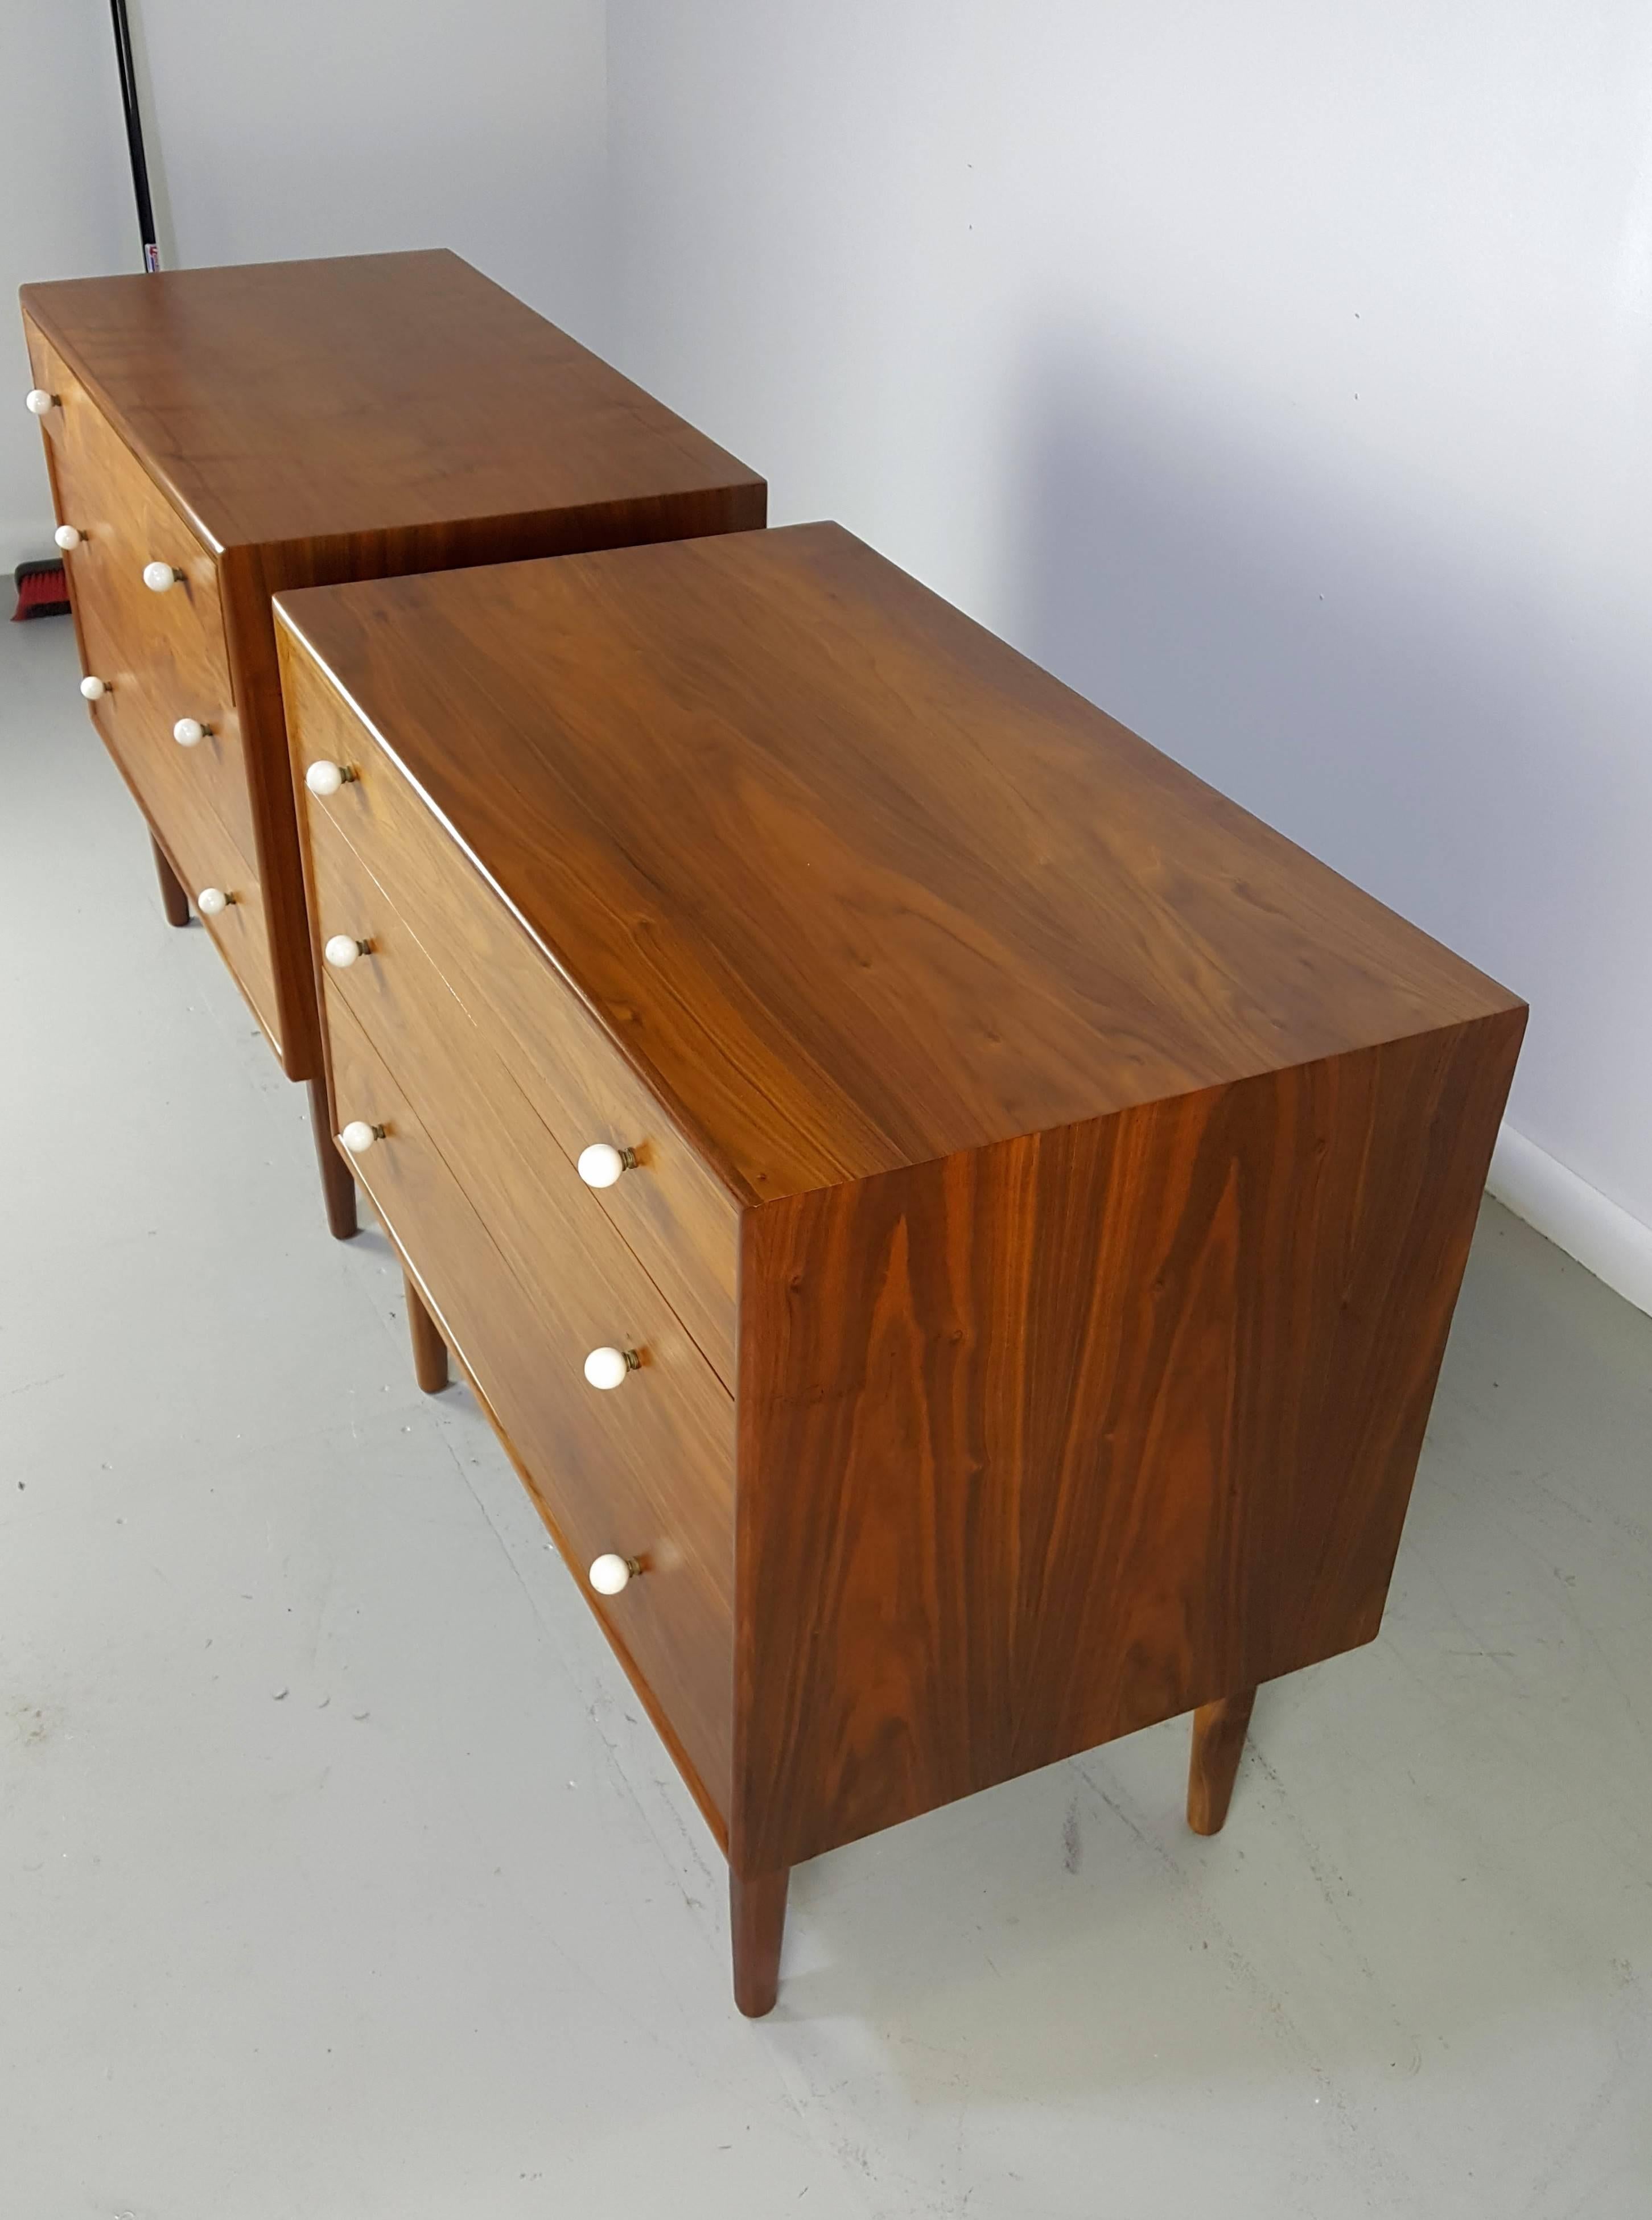 Pair of walnut chests by Kipp Stewart.

See this item in our private NYC showroom! Refine limited is located in the heart of chelsea at the history Starrett-LeHigh building, 601 West 26th Street, Suite M258. Please call us to schedule an